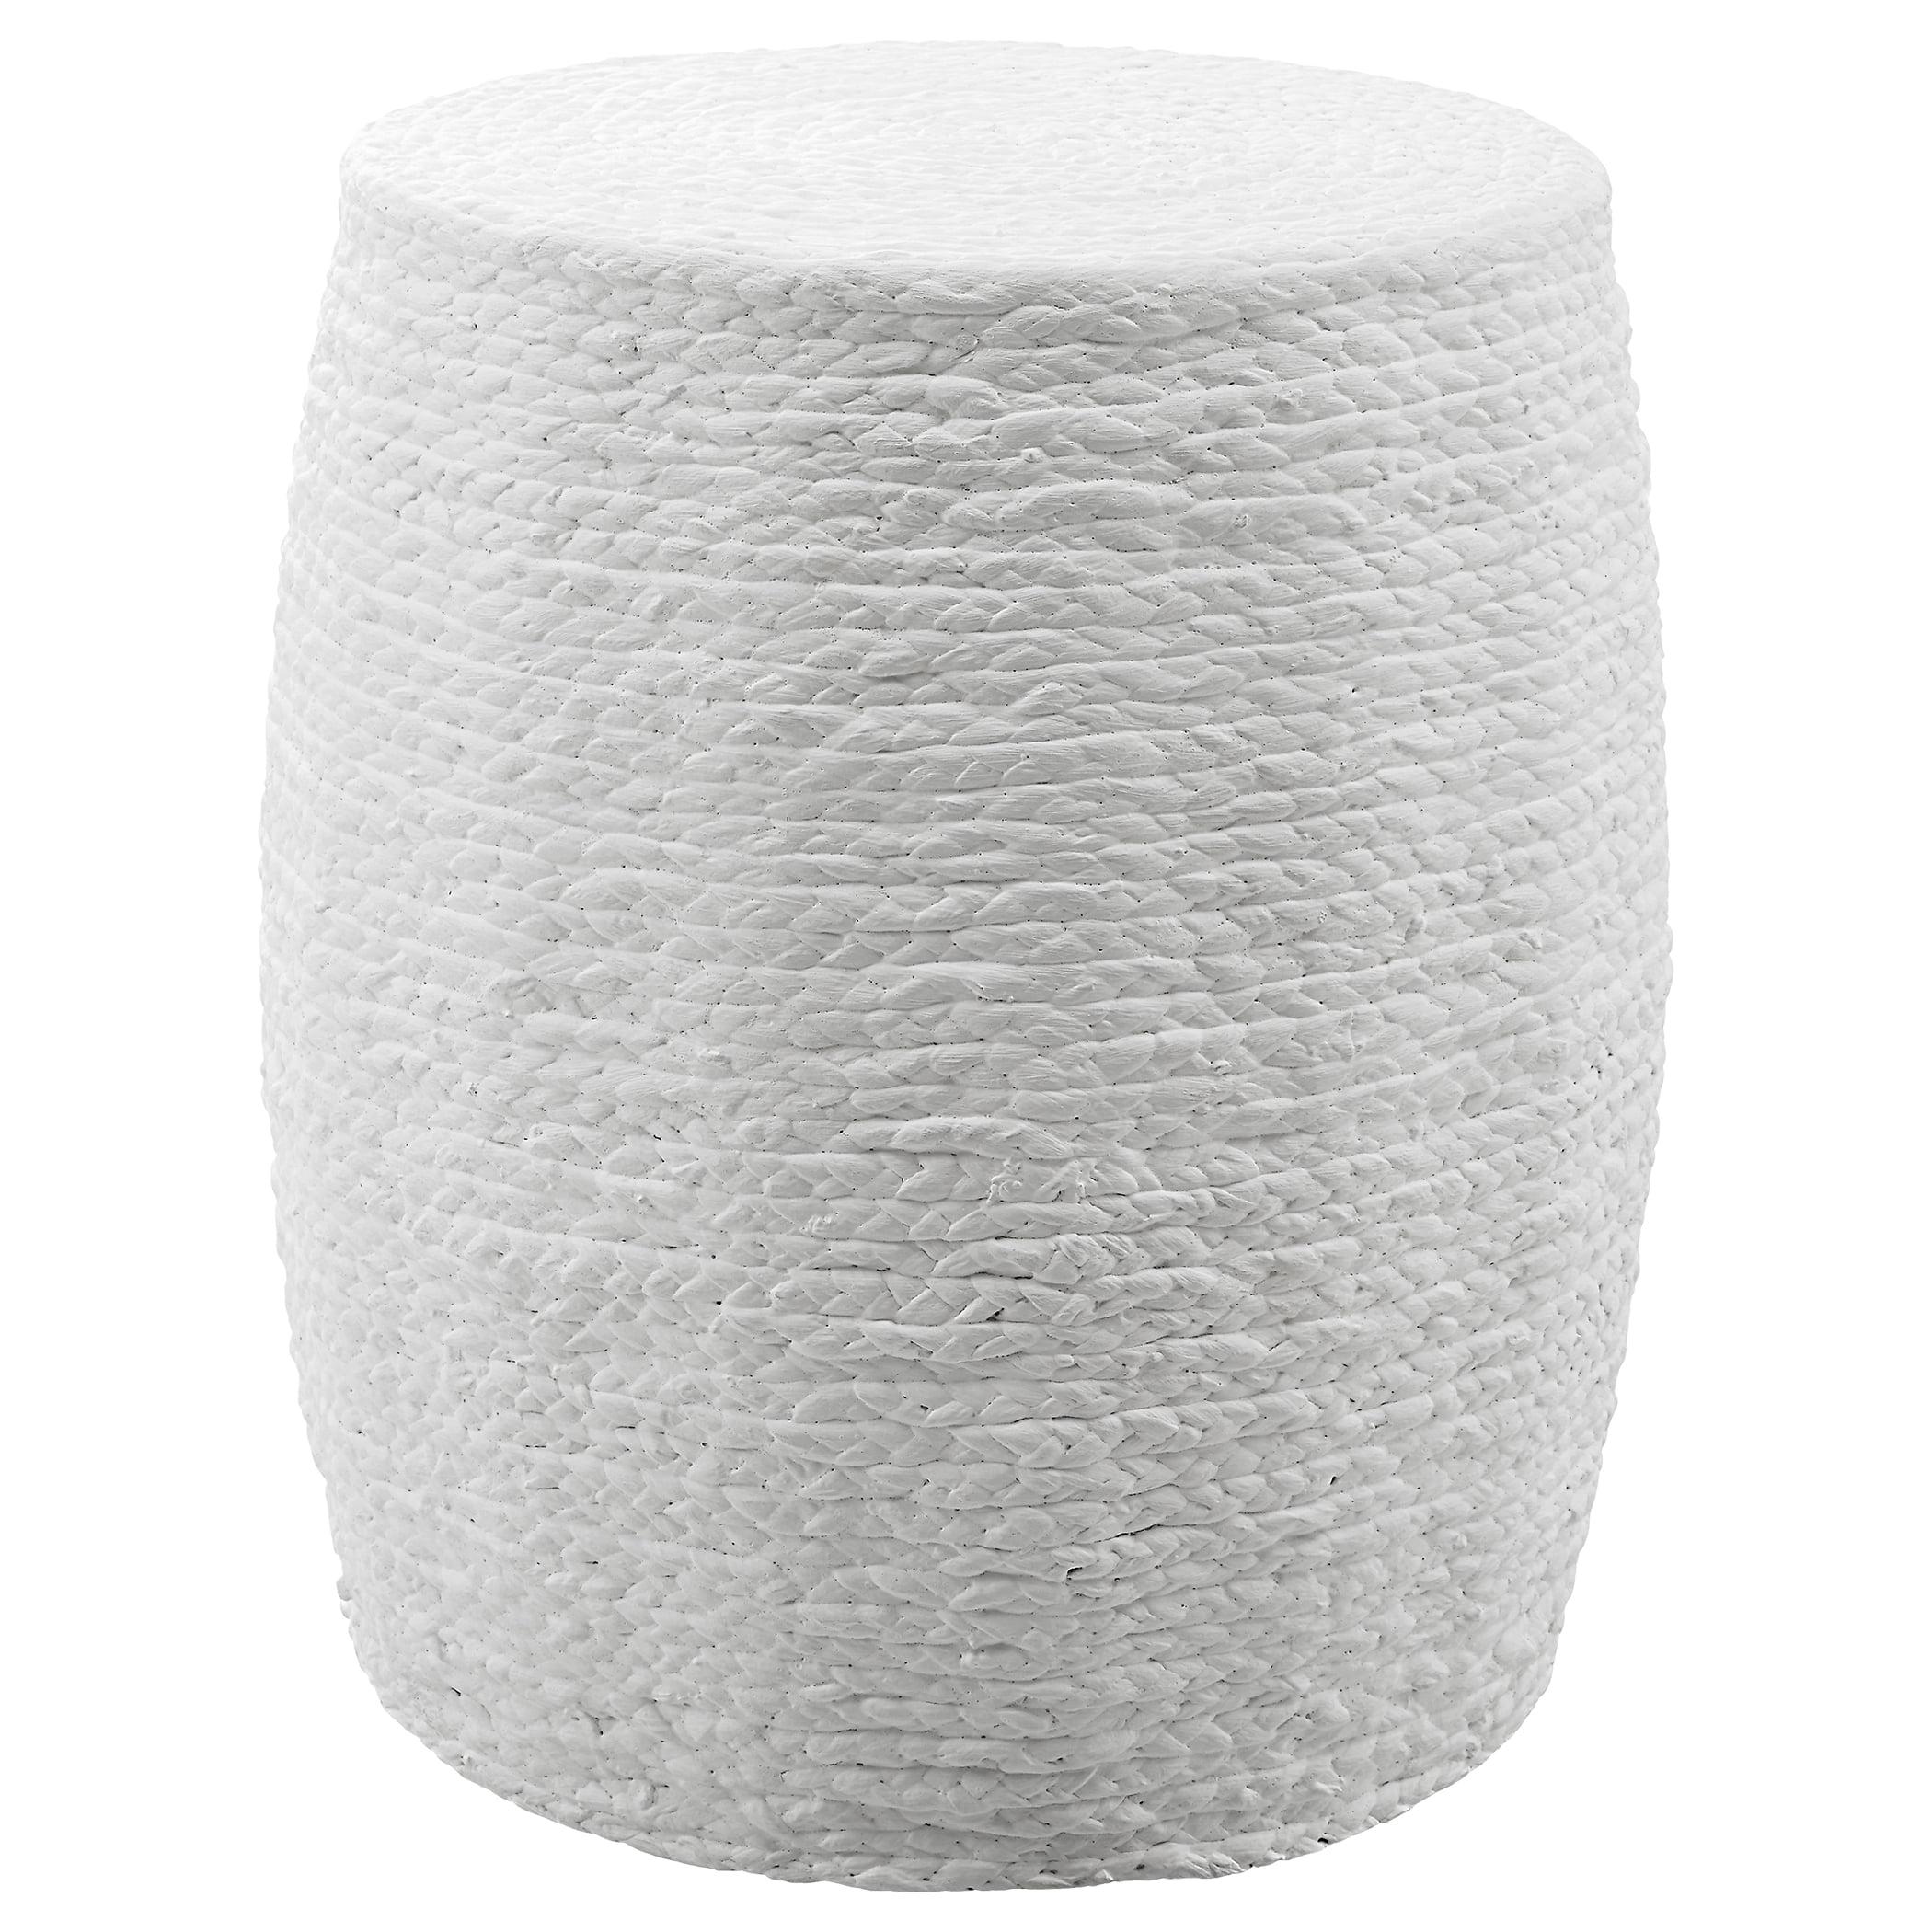 Resort Casual White Braided Straw Accent Stool